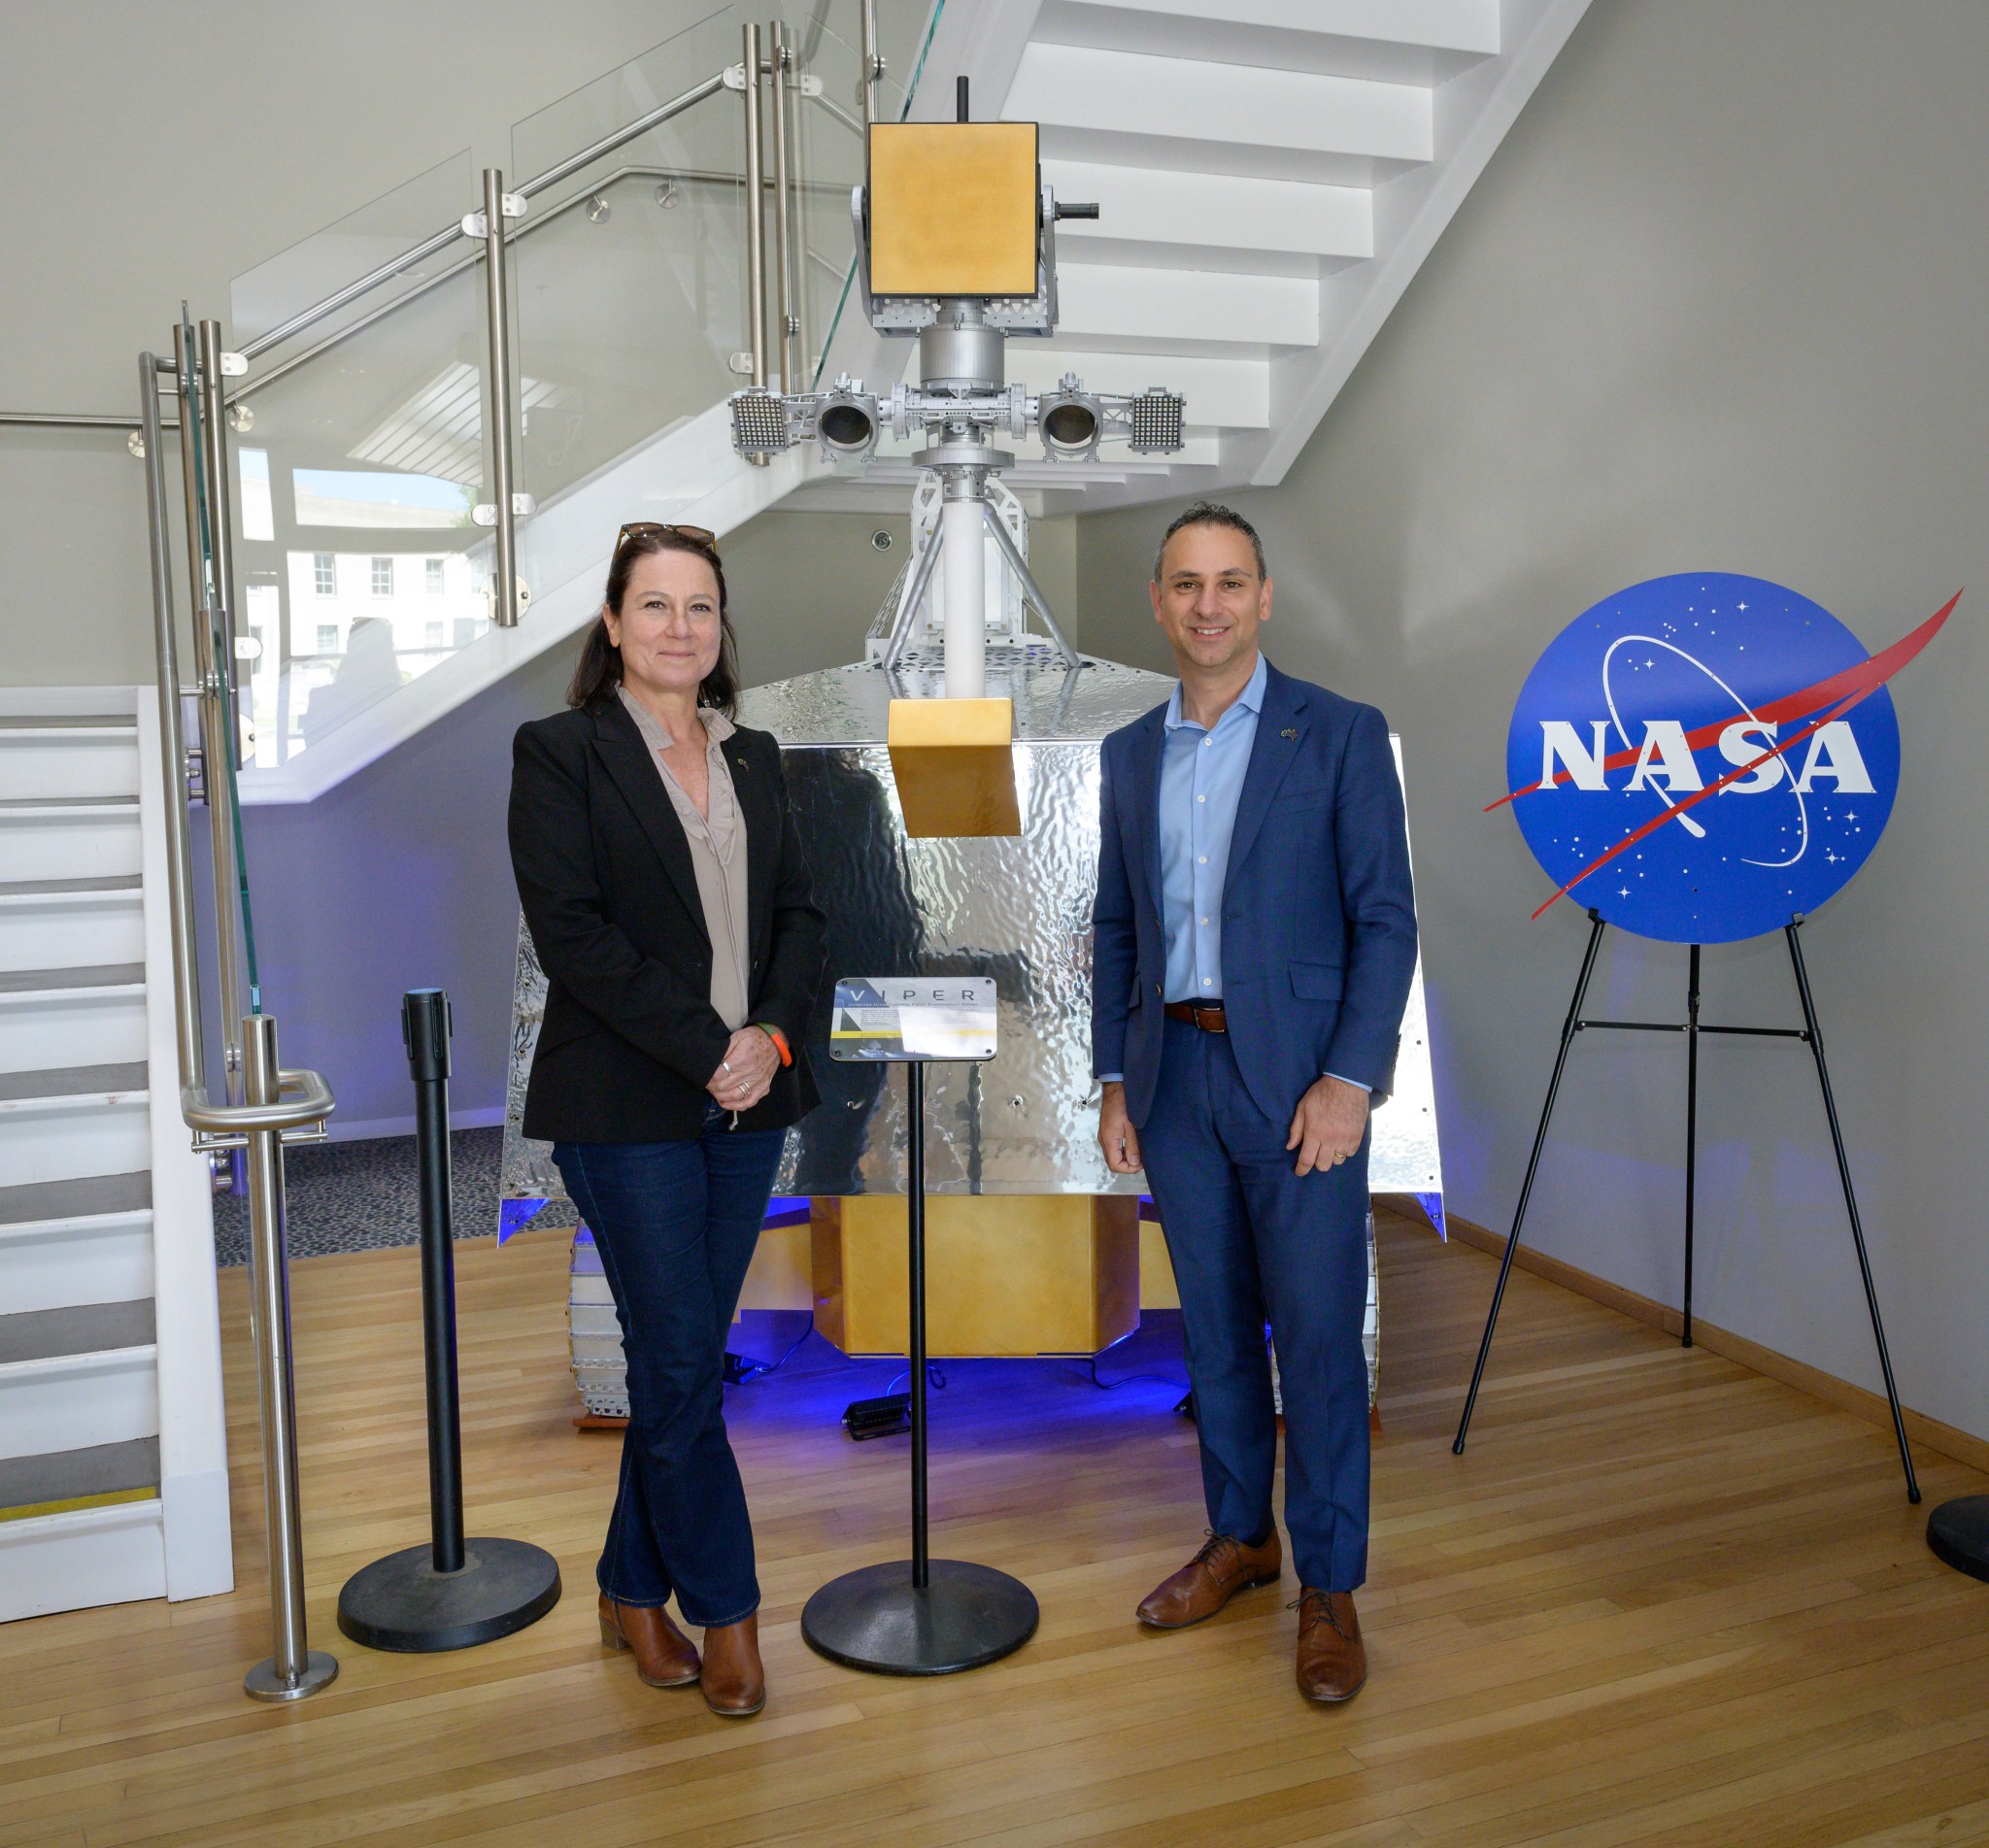 Aude Vignelles, chief technology officer for the Australian Space Agency (ASA), and Enrico Palermo, head of the ASA, stand next to a full-scale model of NASAs Volatiles Investigating Polar Exploration Rover (VIPER) at NASA Ames.